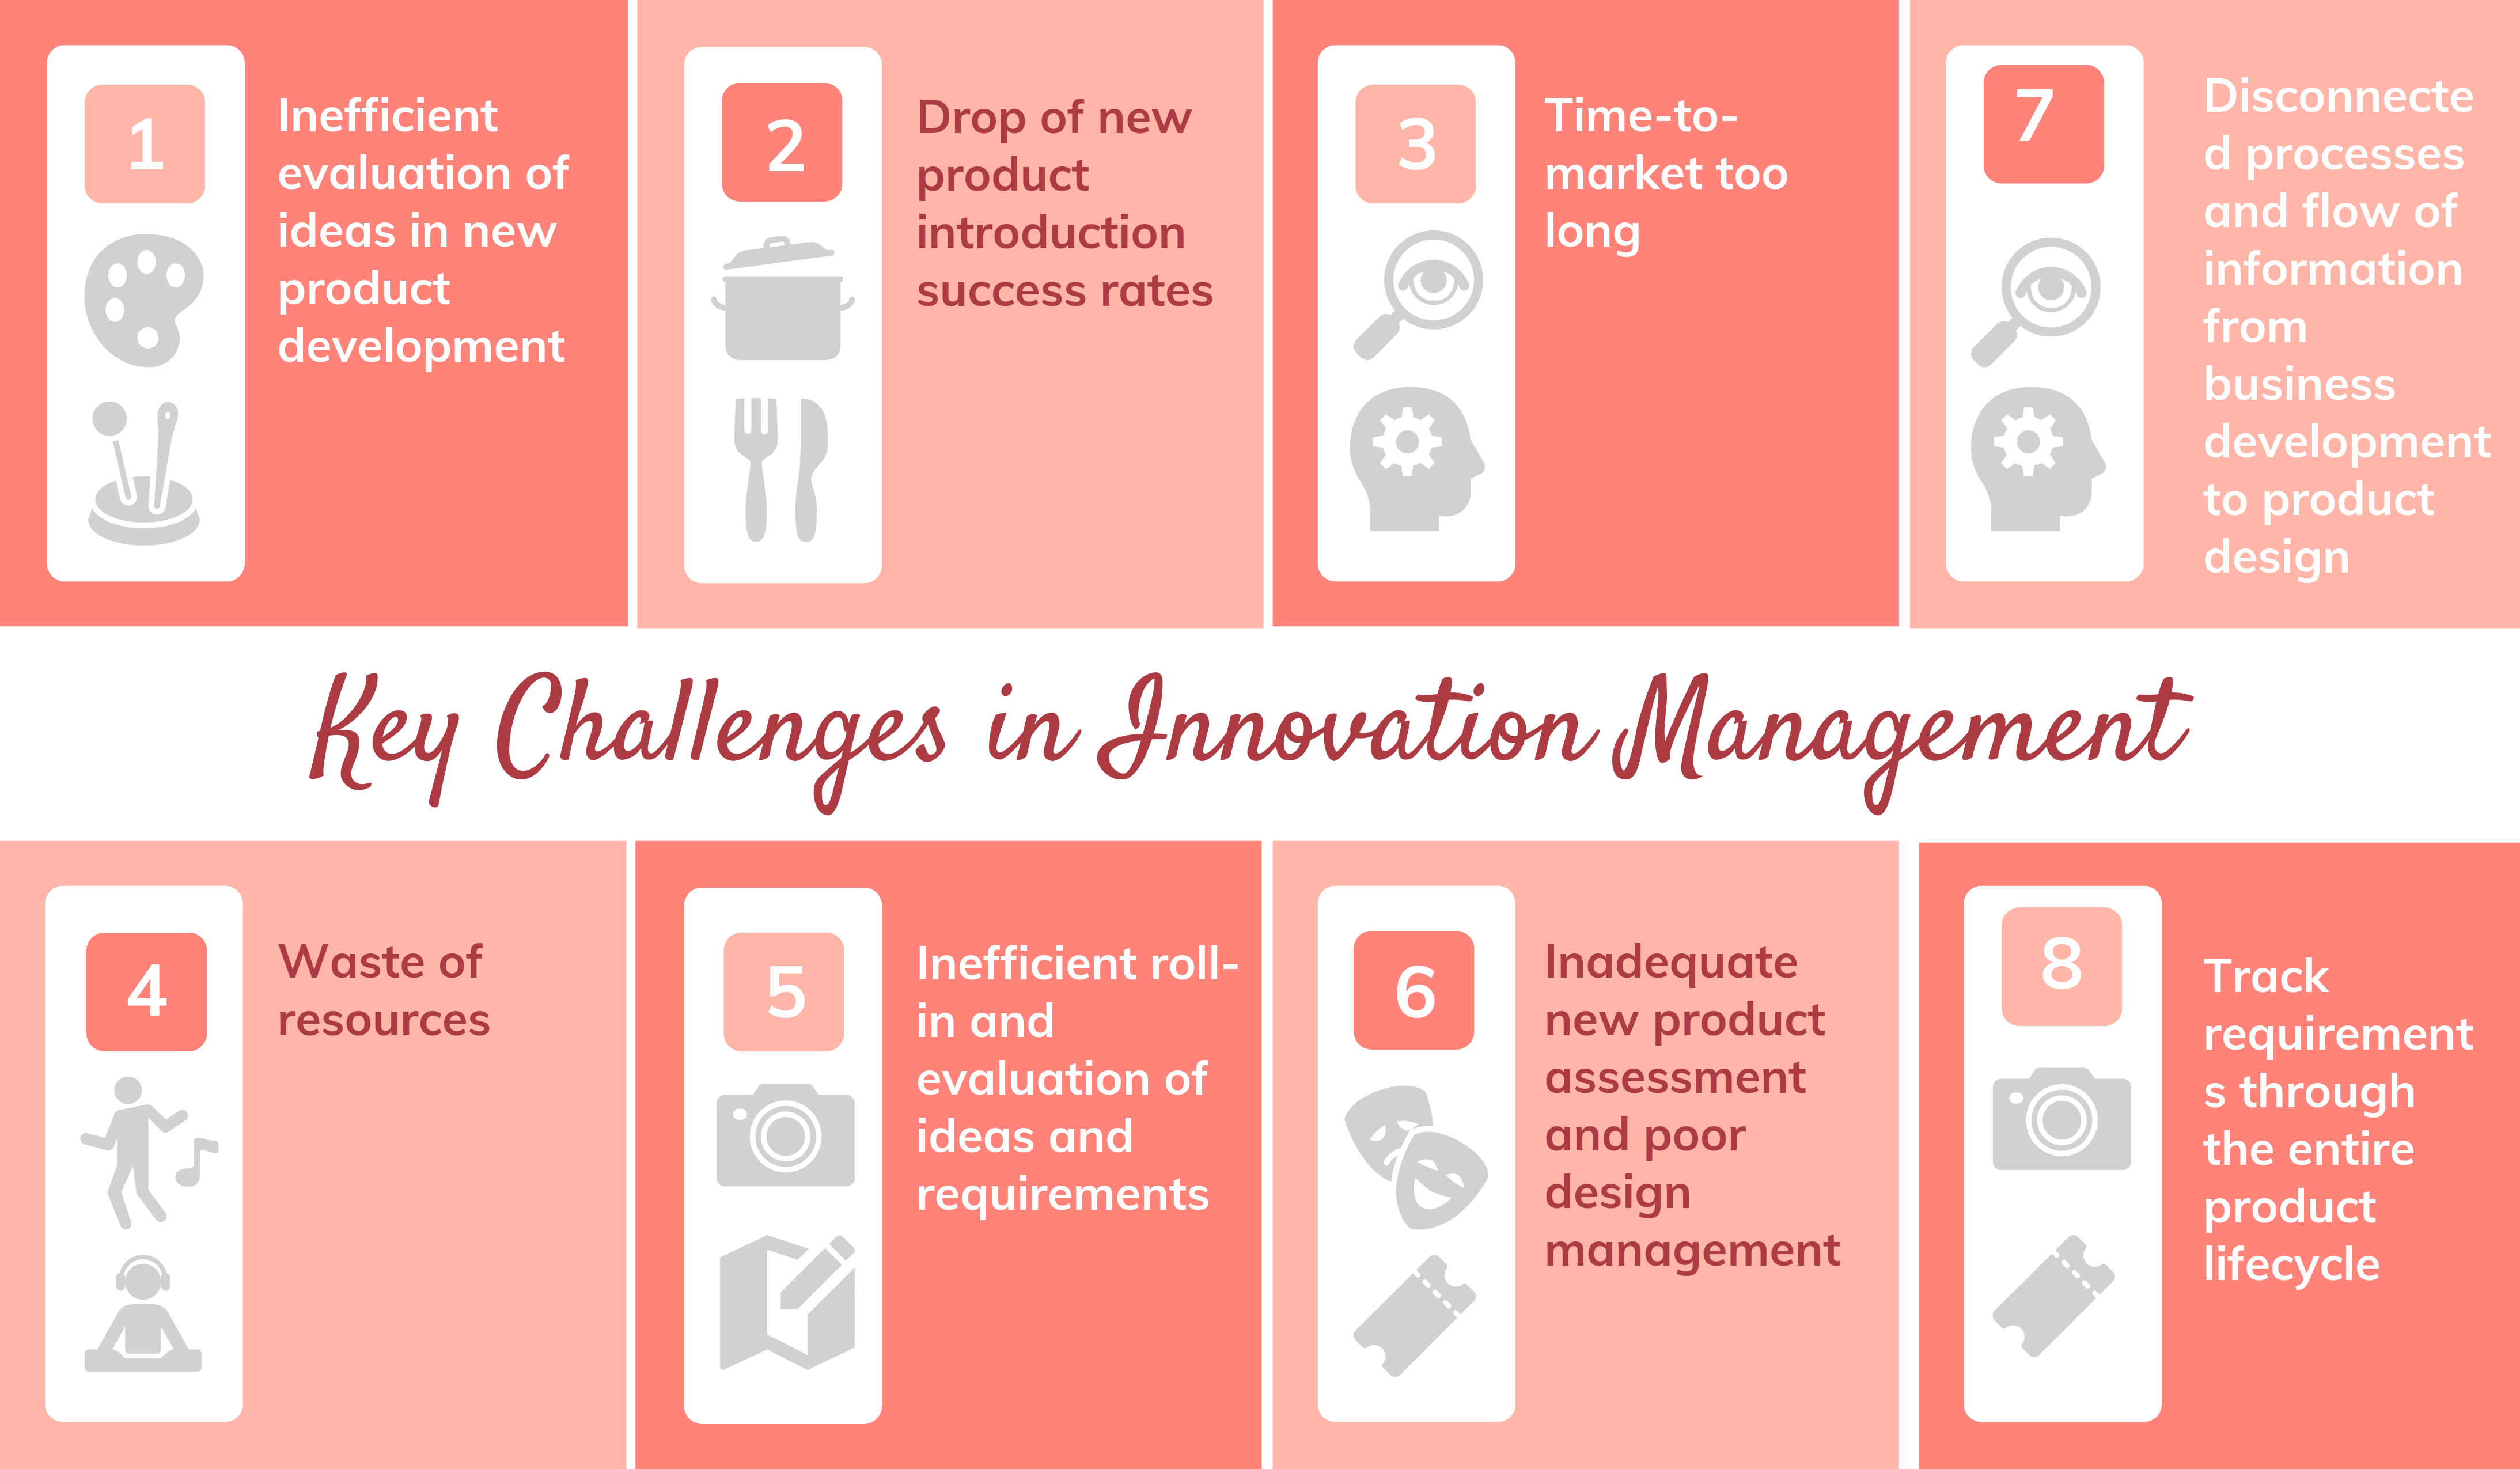 What are the Key Challenges in Innovation Management